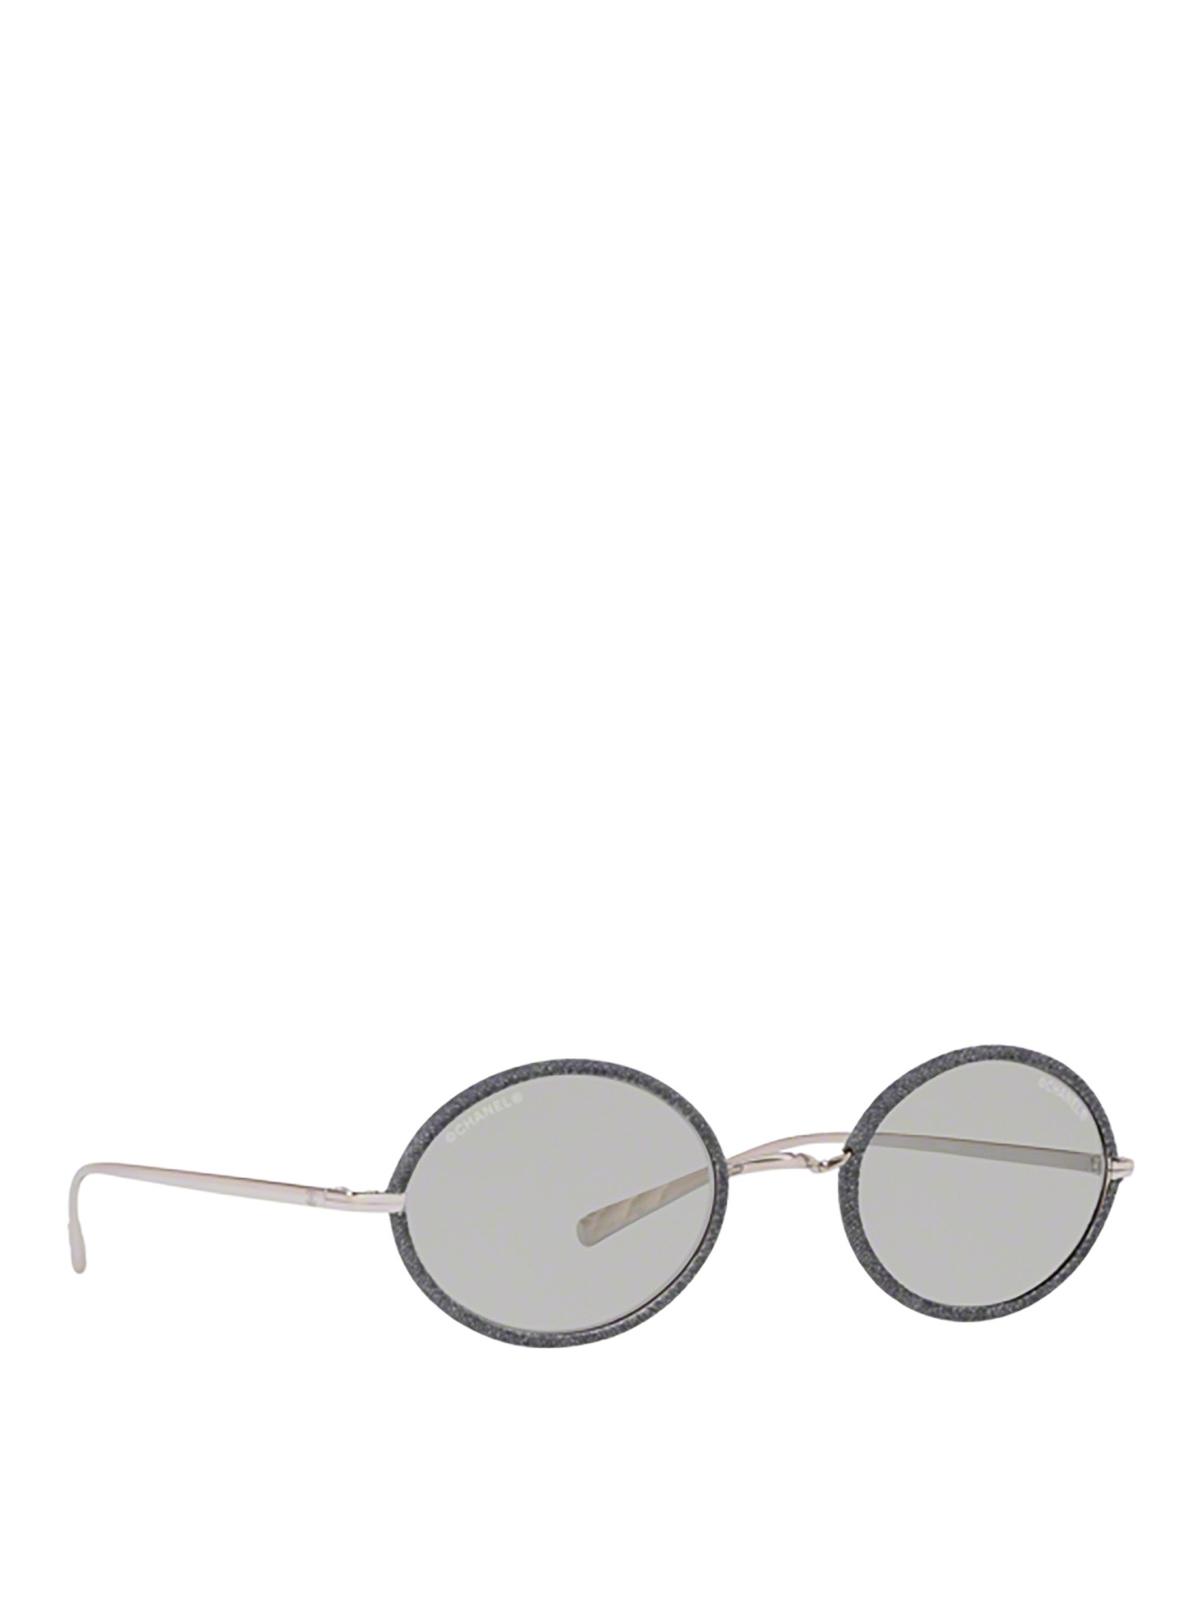 Metal and denim rounded sunglasses